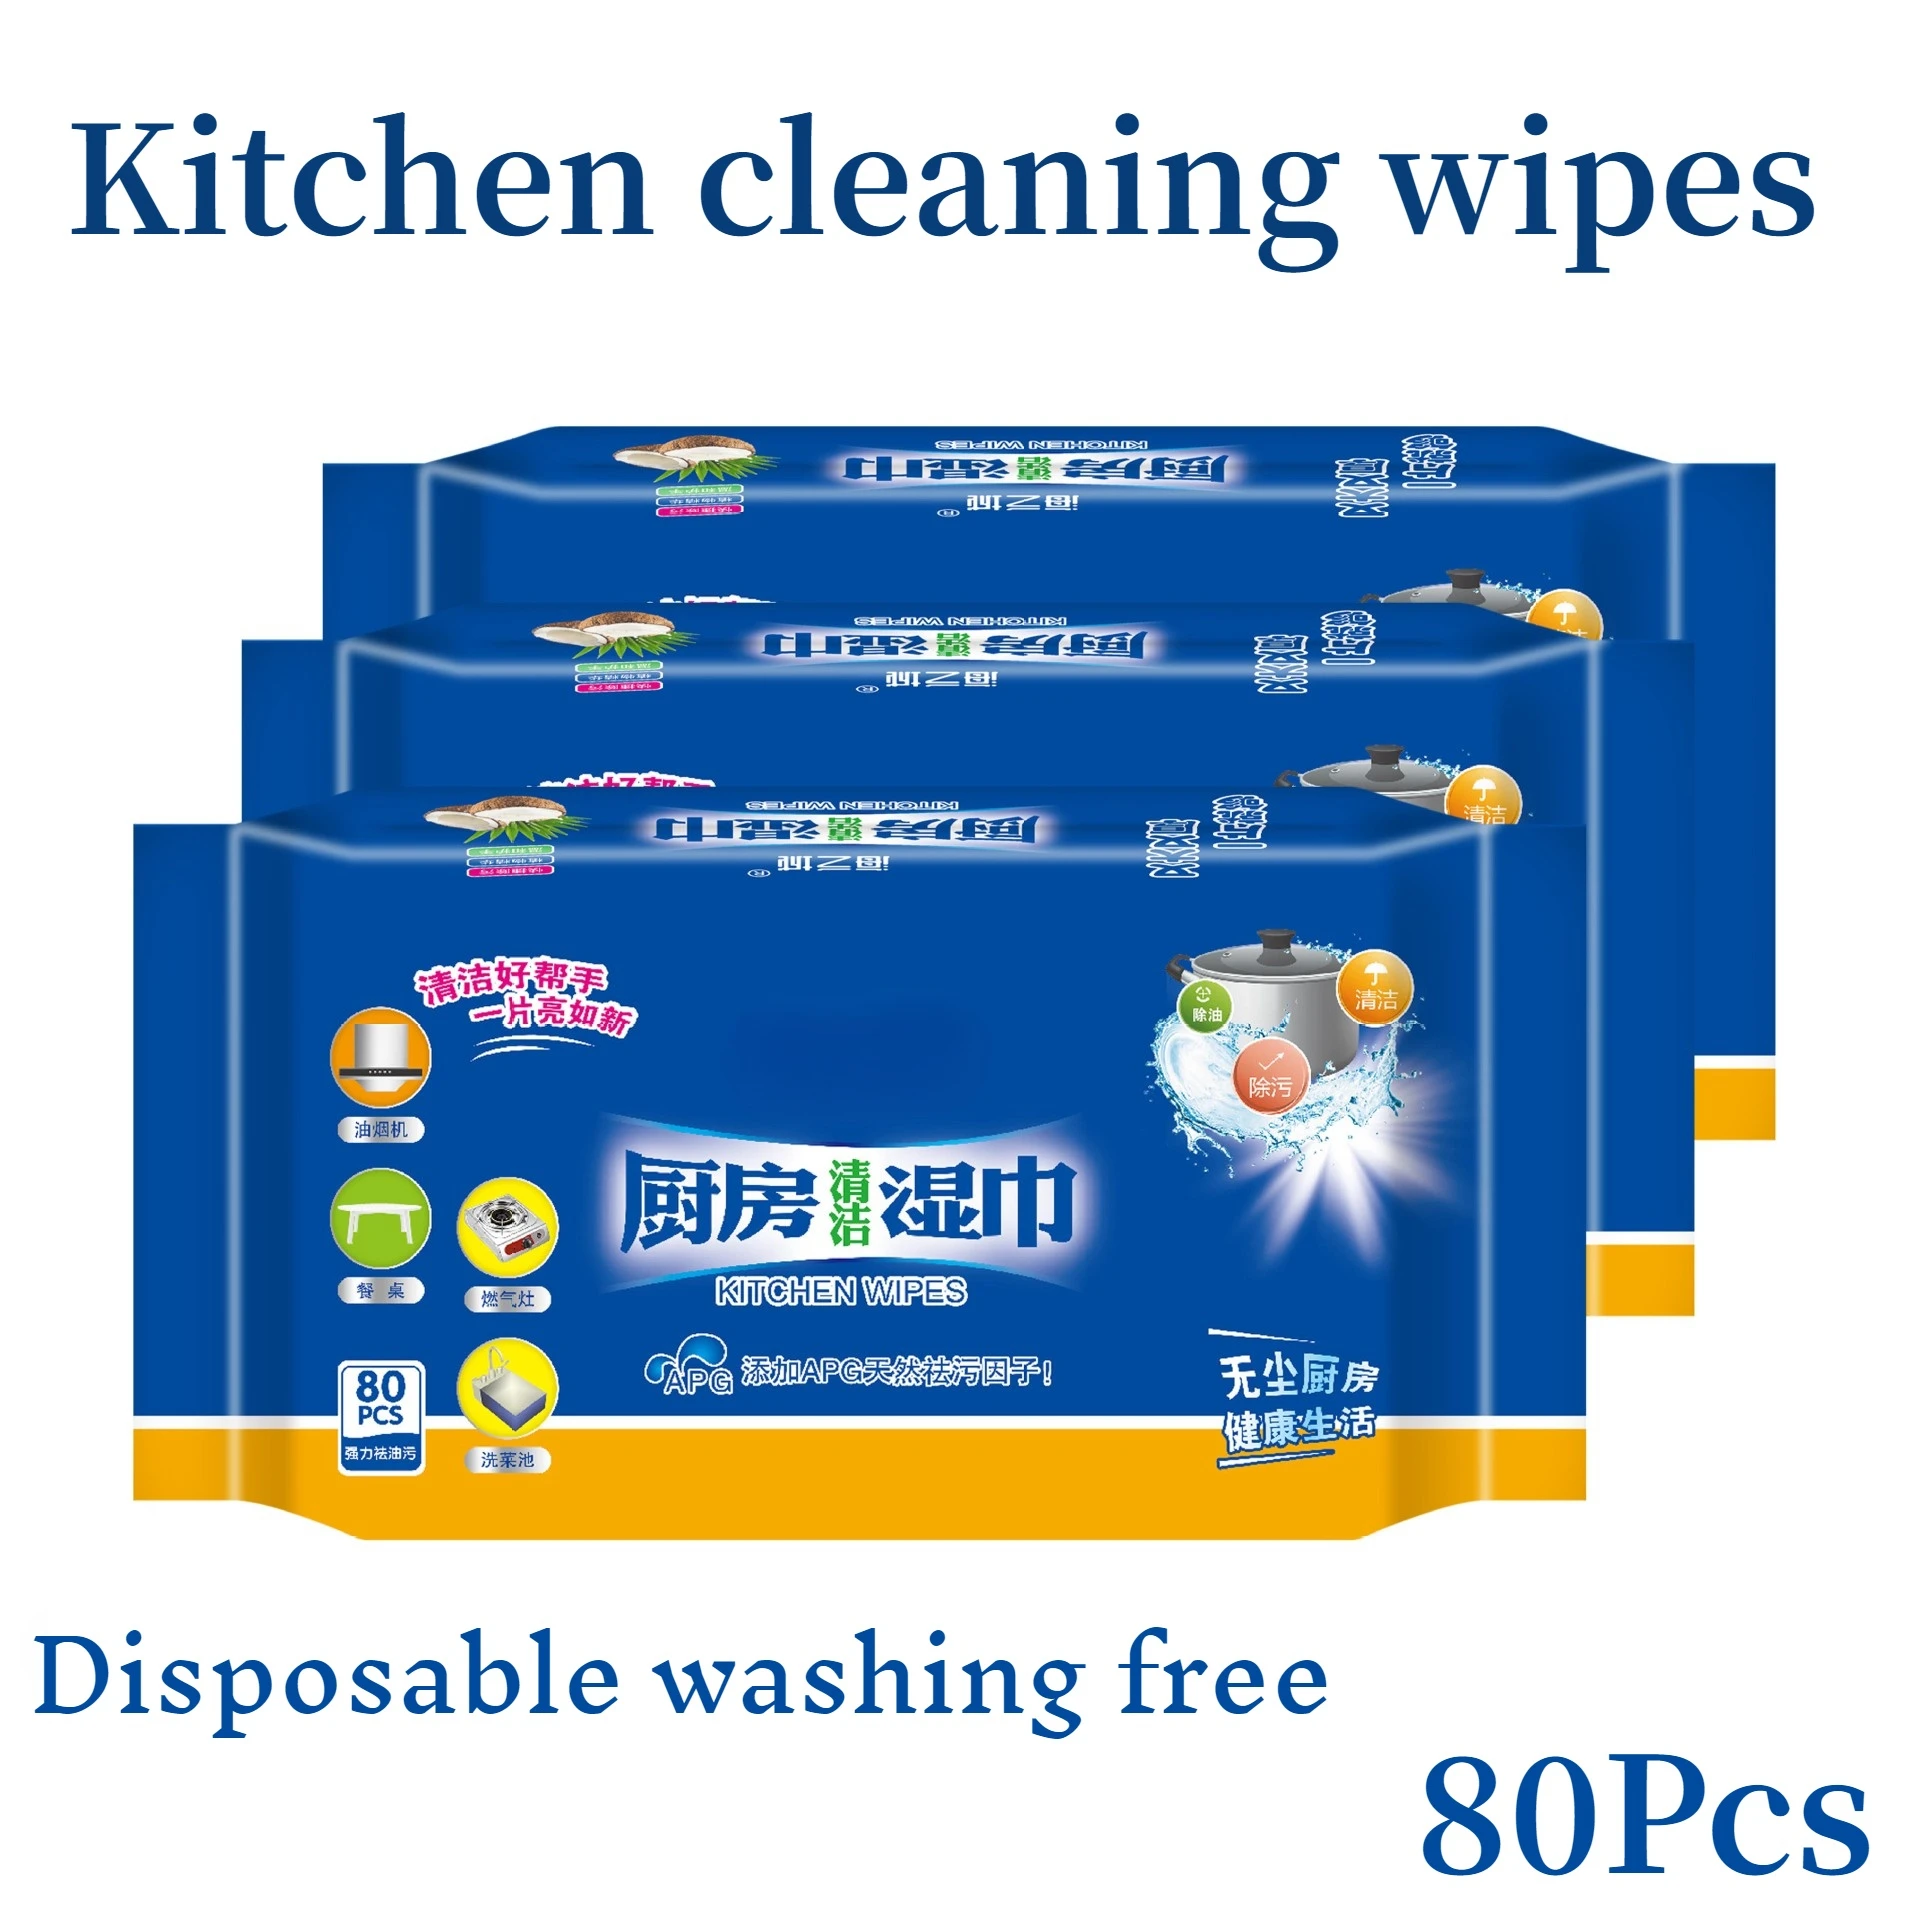 

kitchen Disinfectant Wipes,Degreasing,Multi-Surface Antibacterial Cleaning Wipes,For Disinfecting&Cleaning,Lemon Essential Oil